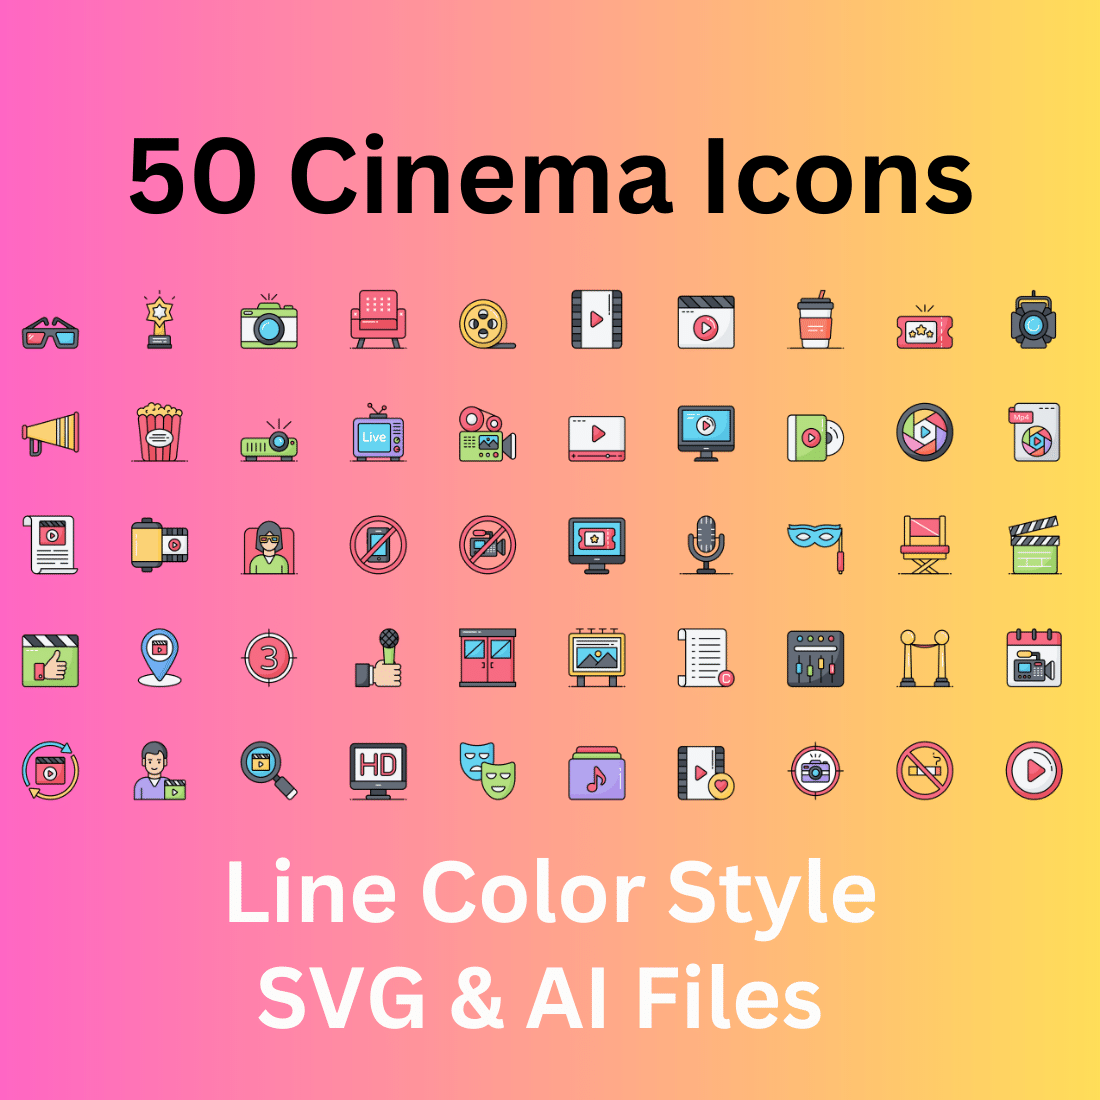 Cinema Icon Set 50 Outline Icons - SVG And AI Files cover image.